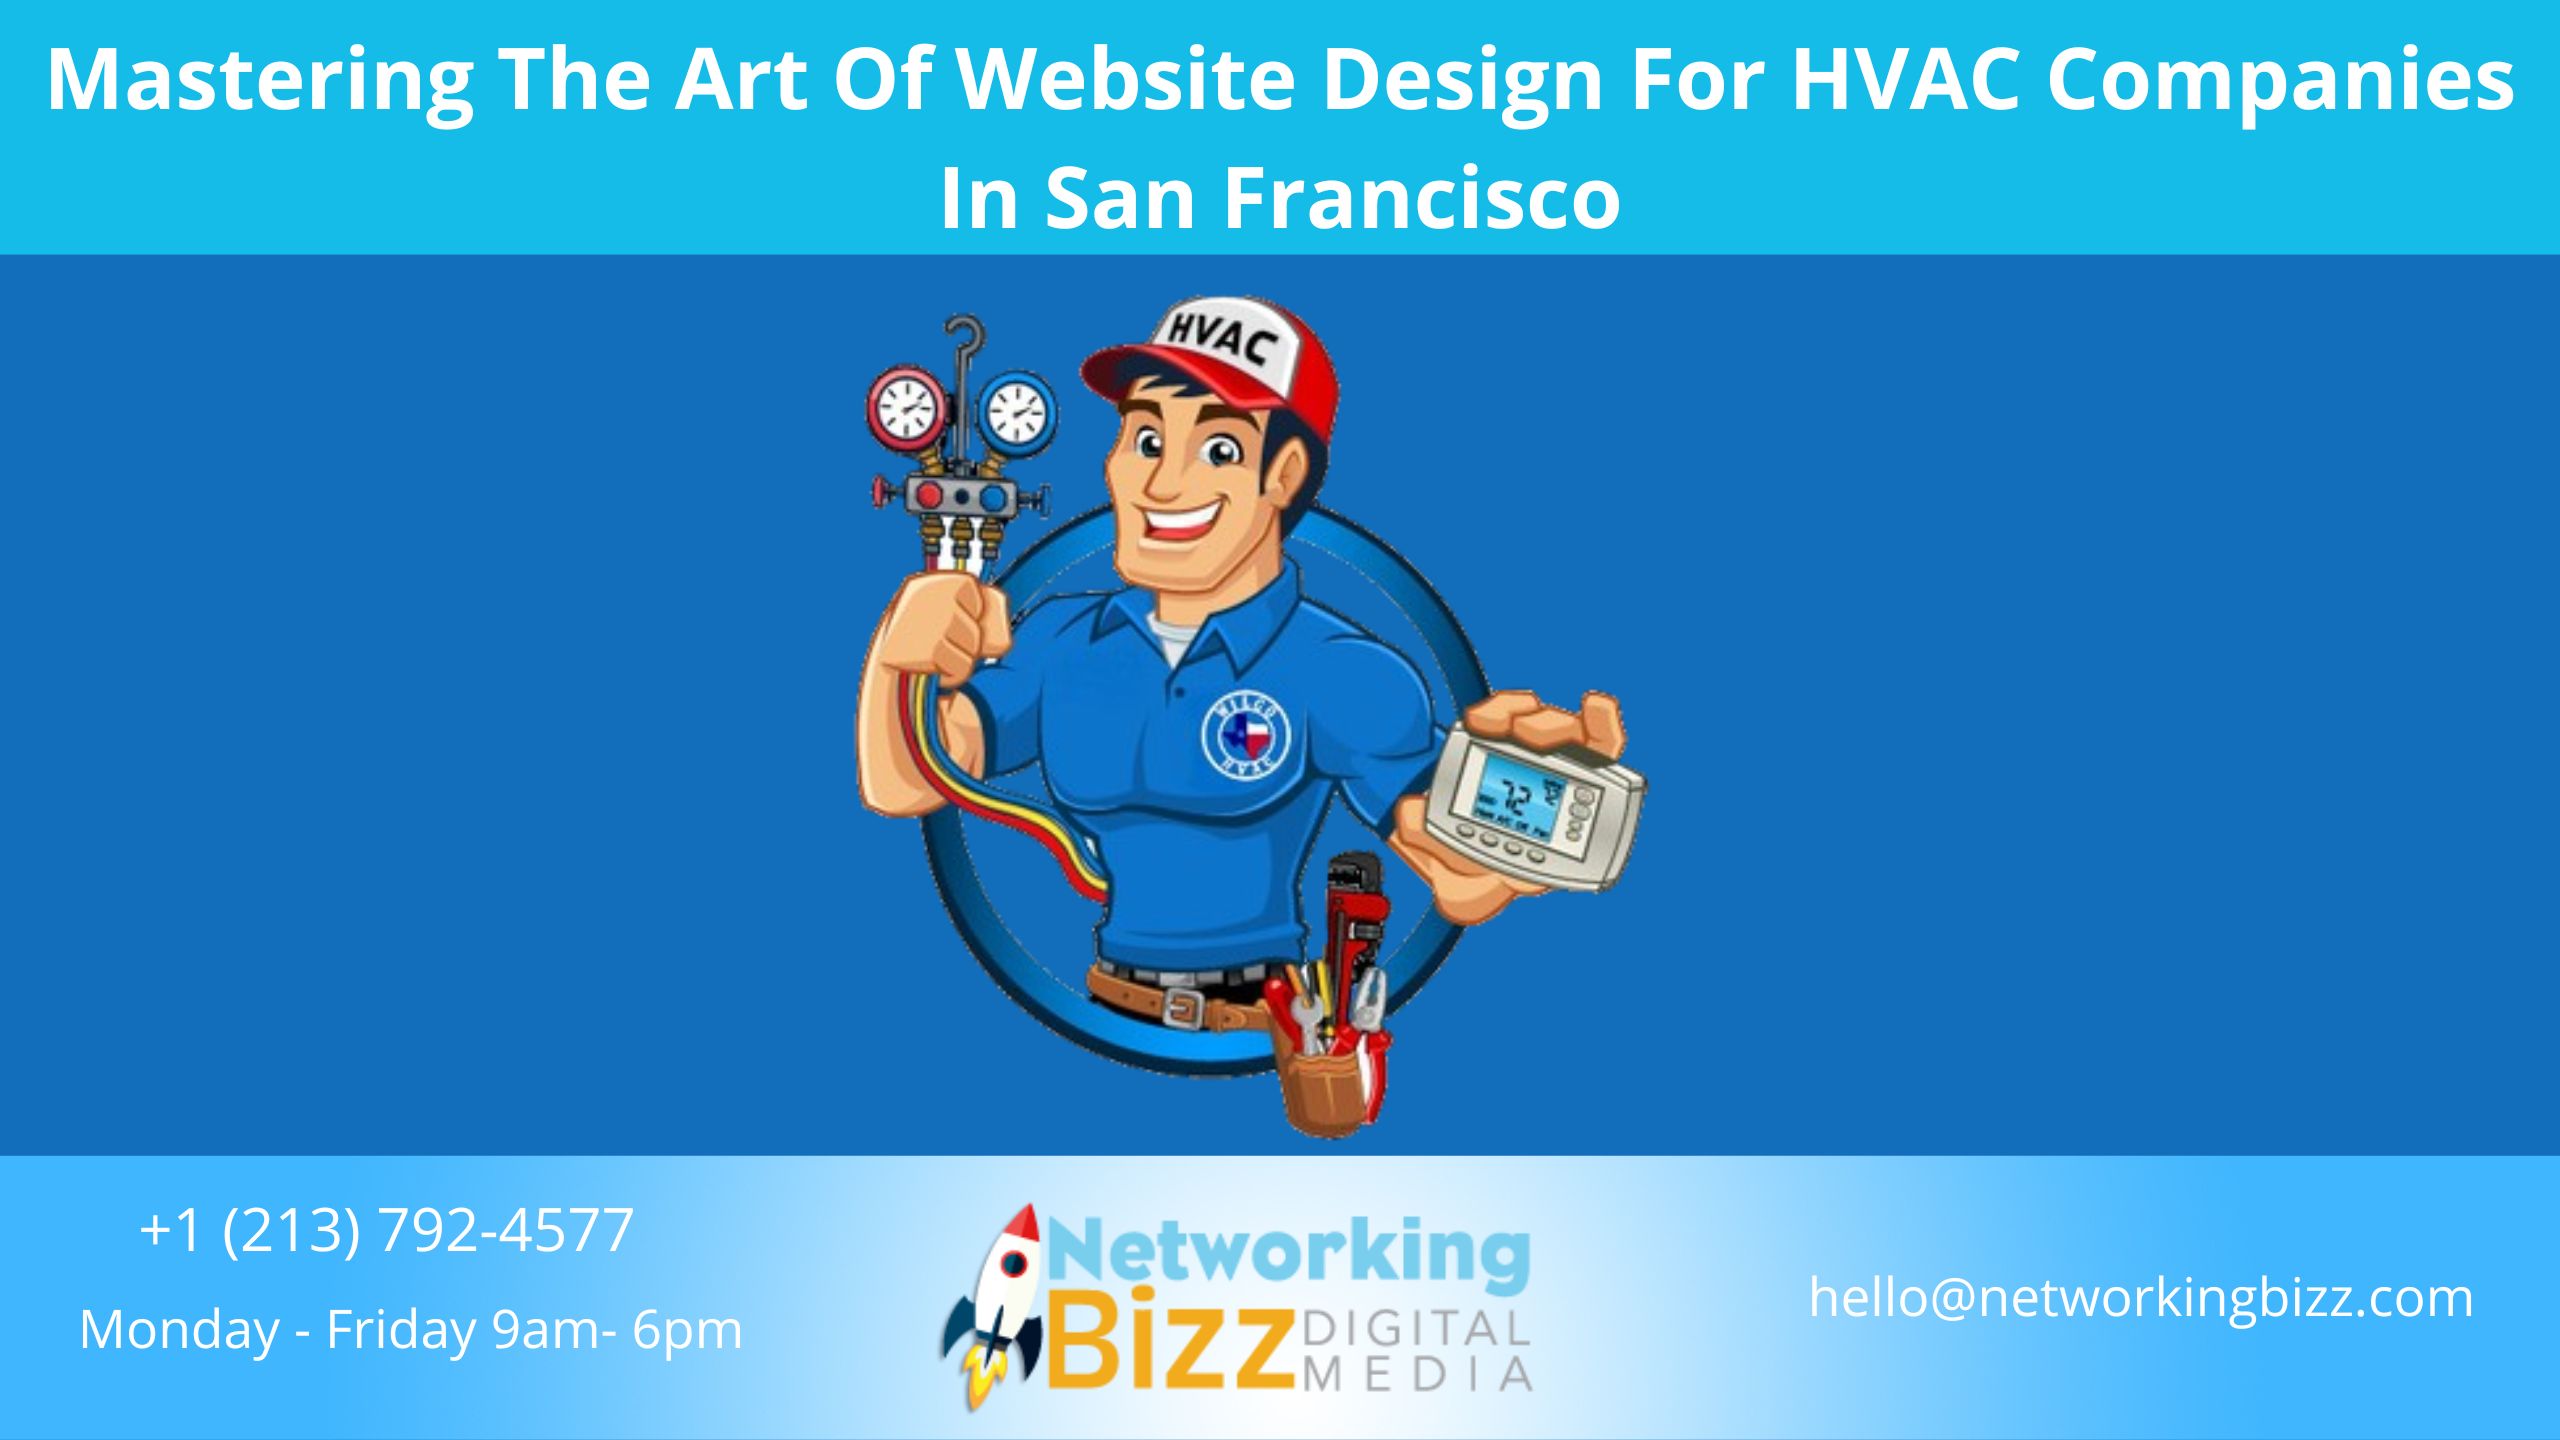 Mastering The Art Of Website Design For HVAC Companies In San Francisco